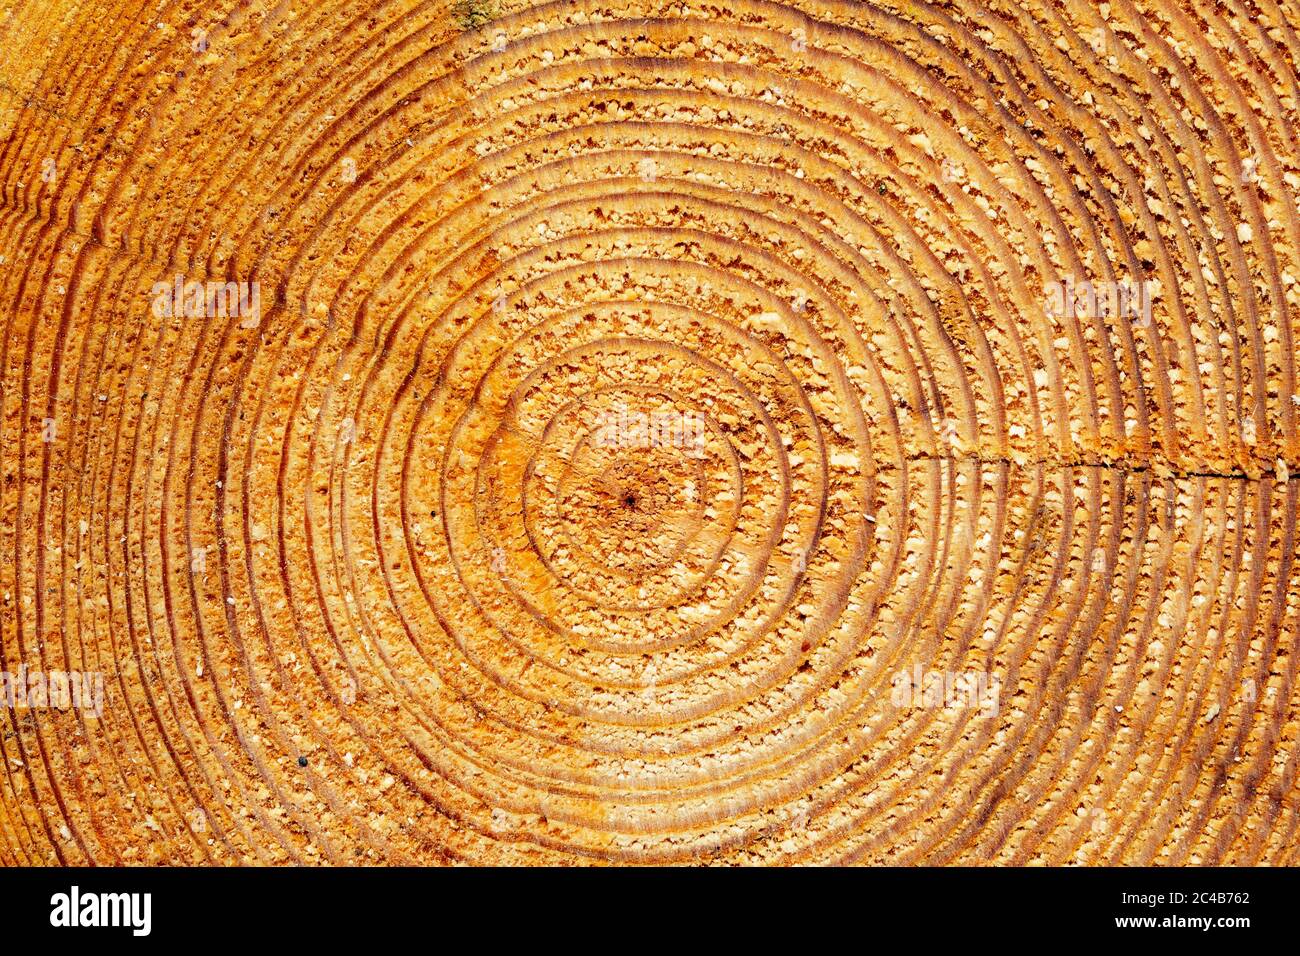 Wood structure with annual rings, cut surface, Austria Stock Photo